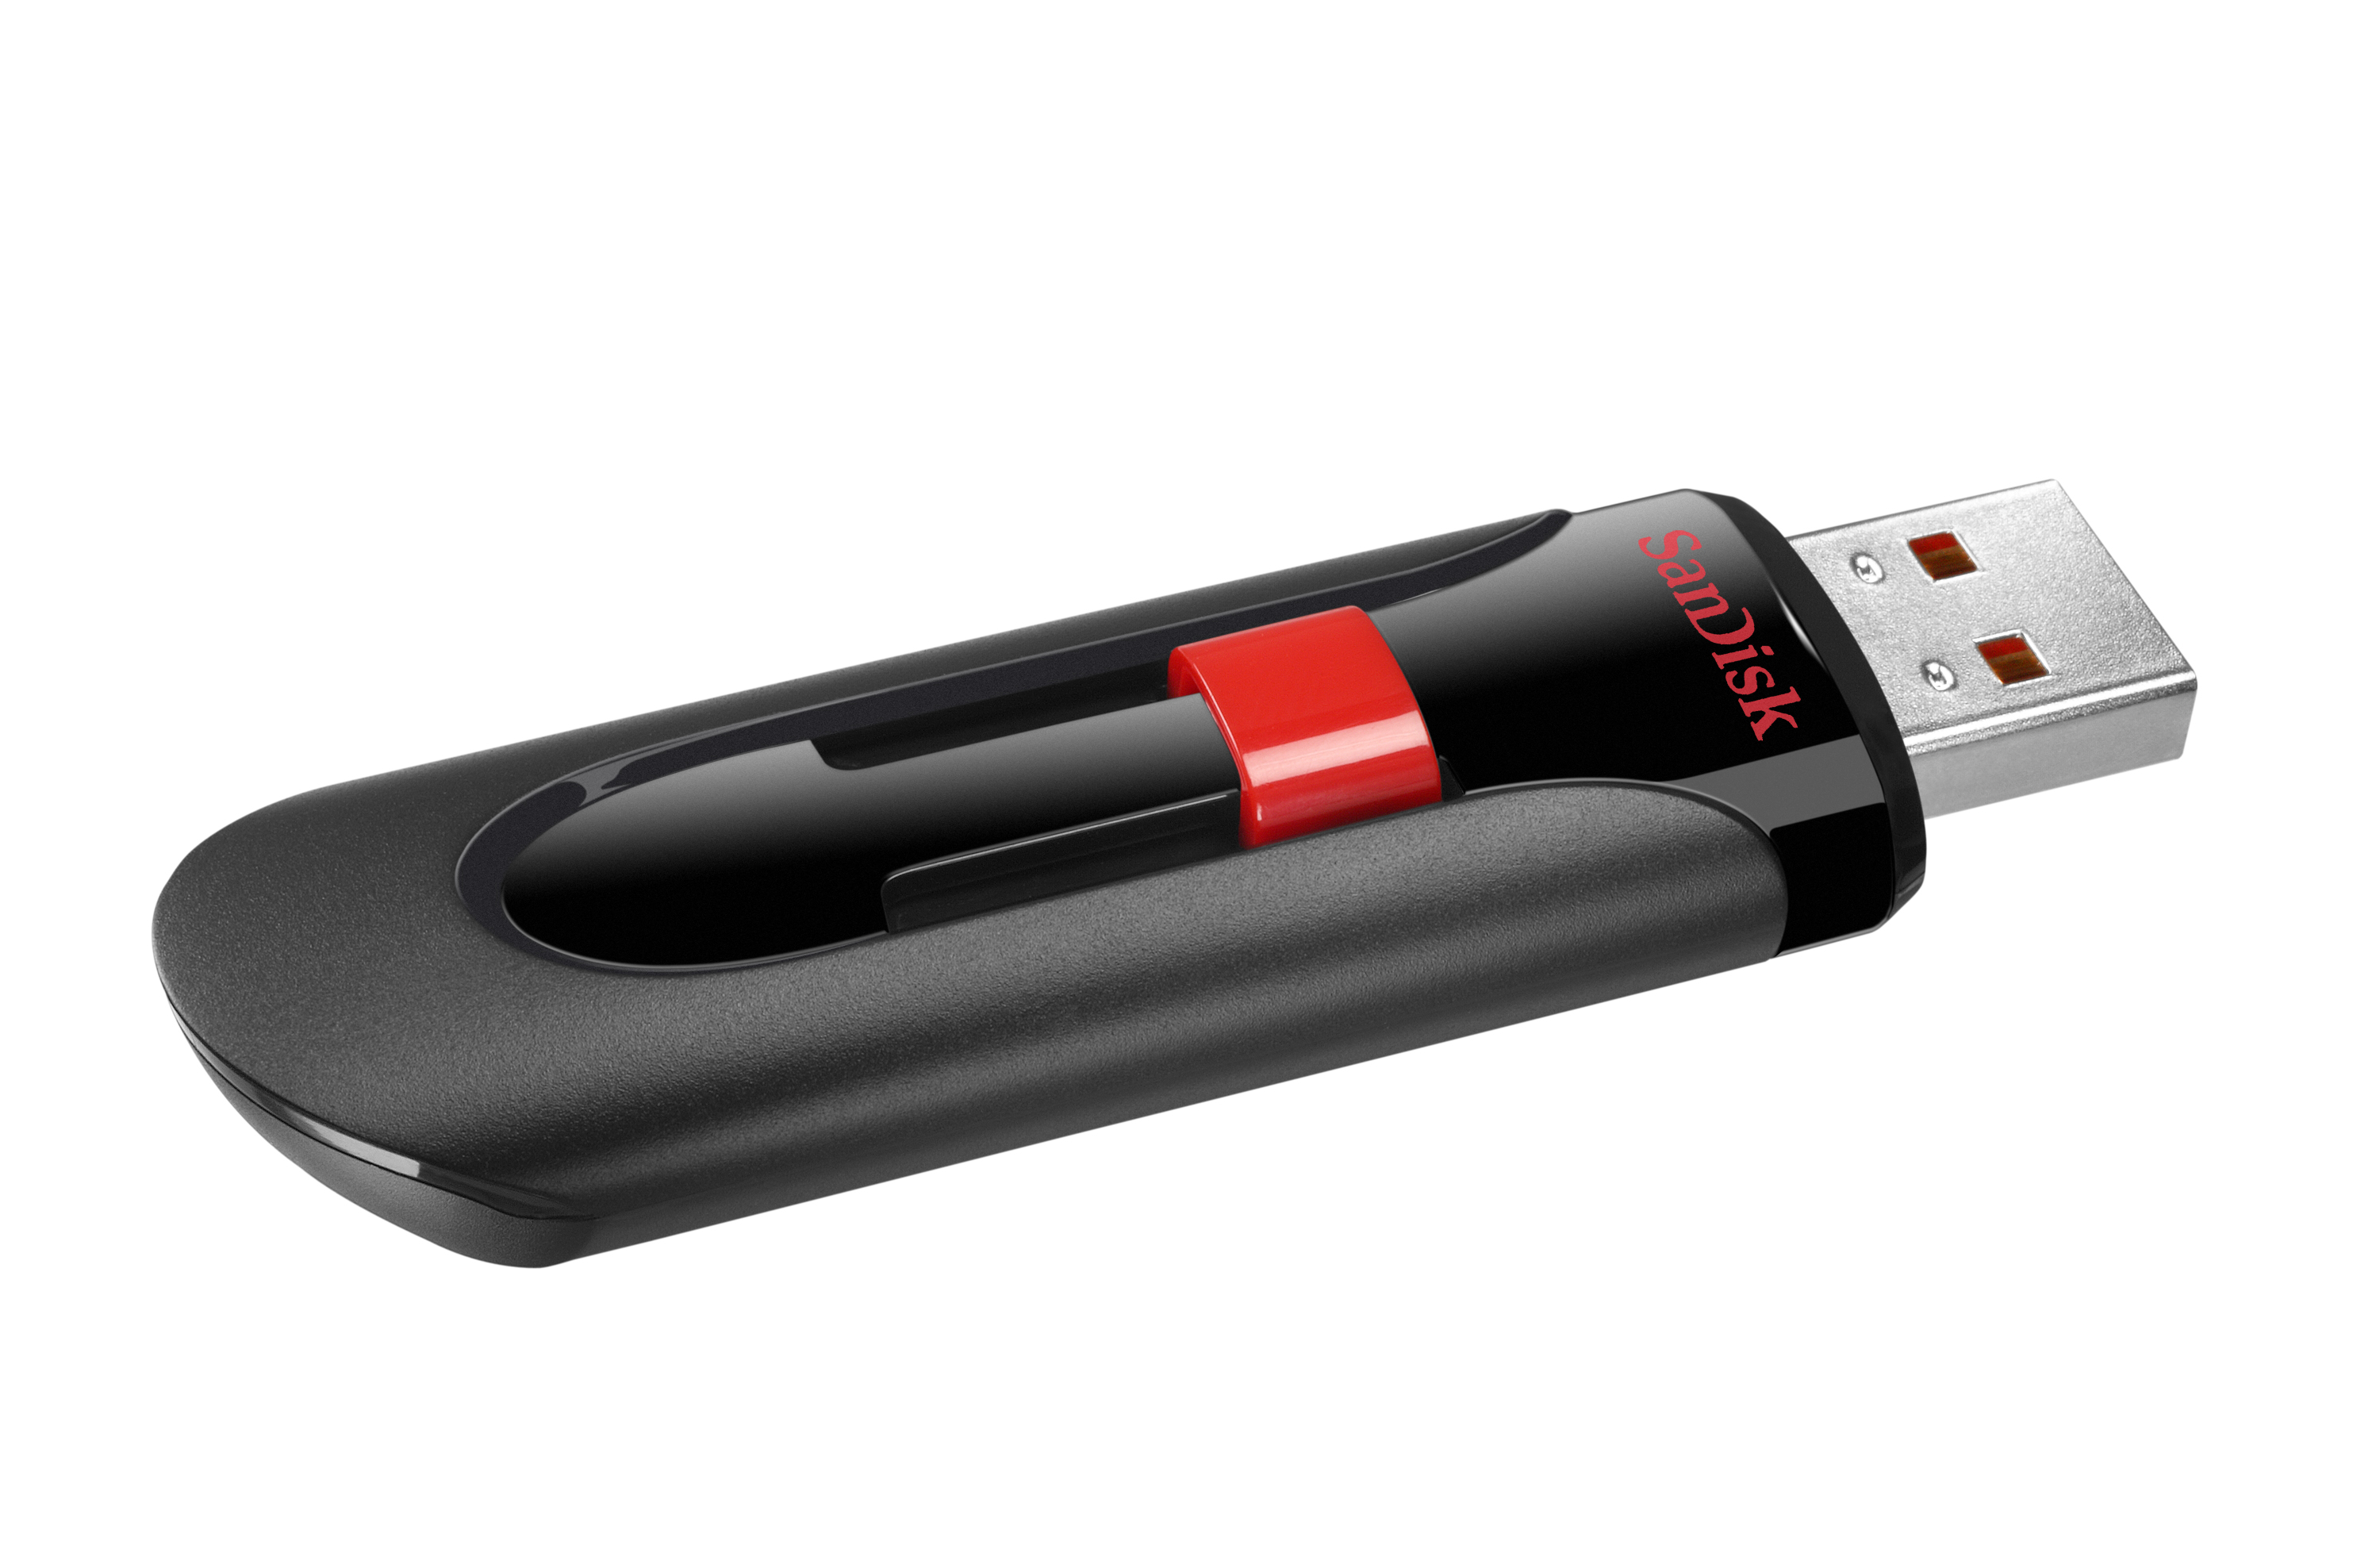 SanDisk 64GB Cruzer Glide USB 2.0 Flash Drive 2 Pack - SDCZ60-064G-AW46TW - image 3 of 8